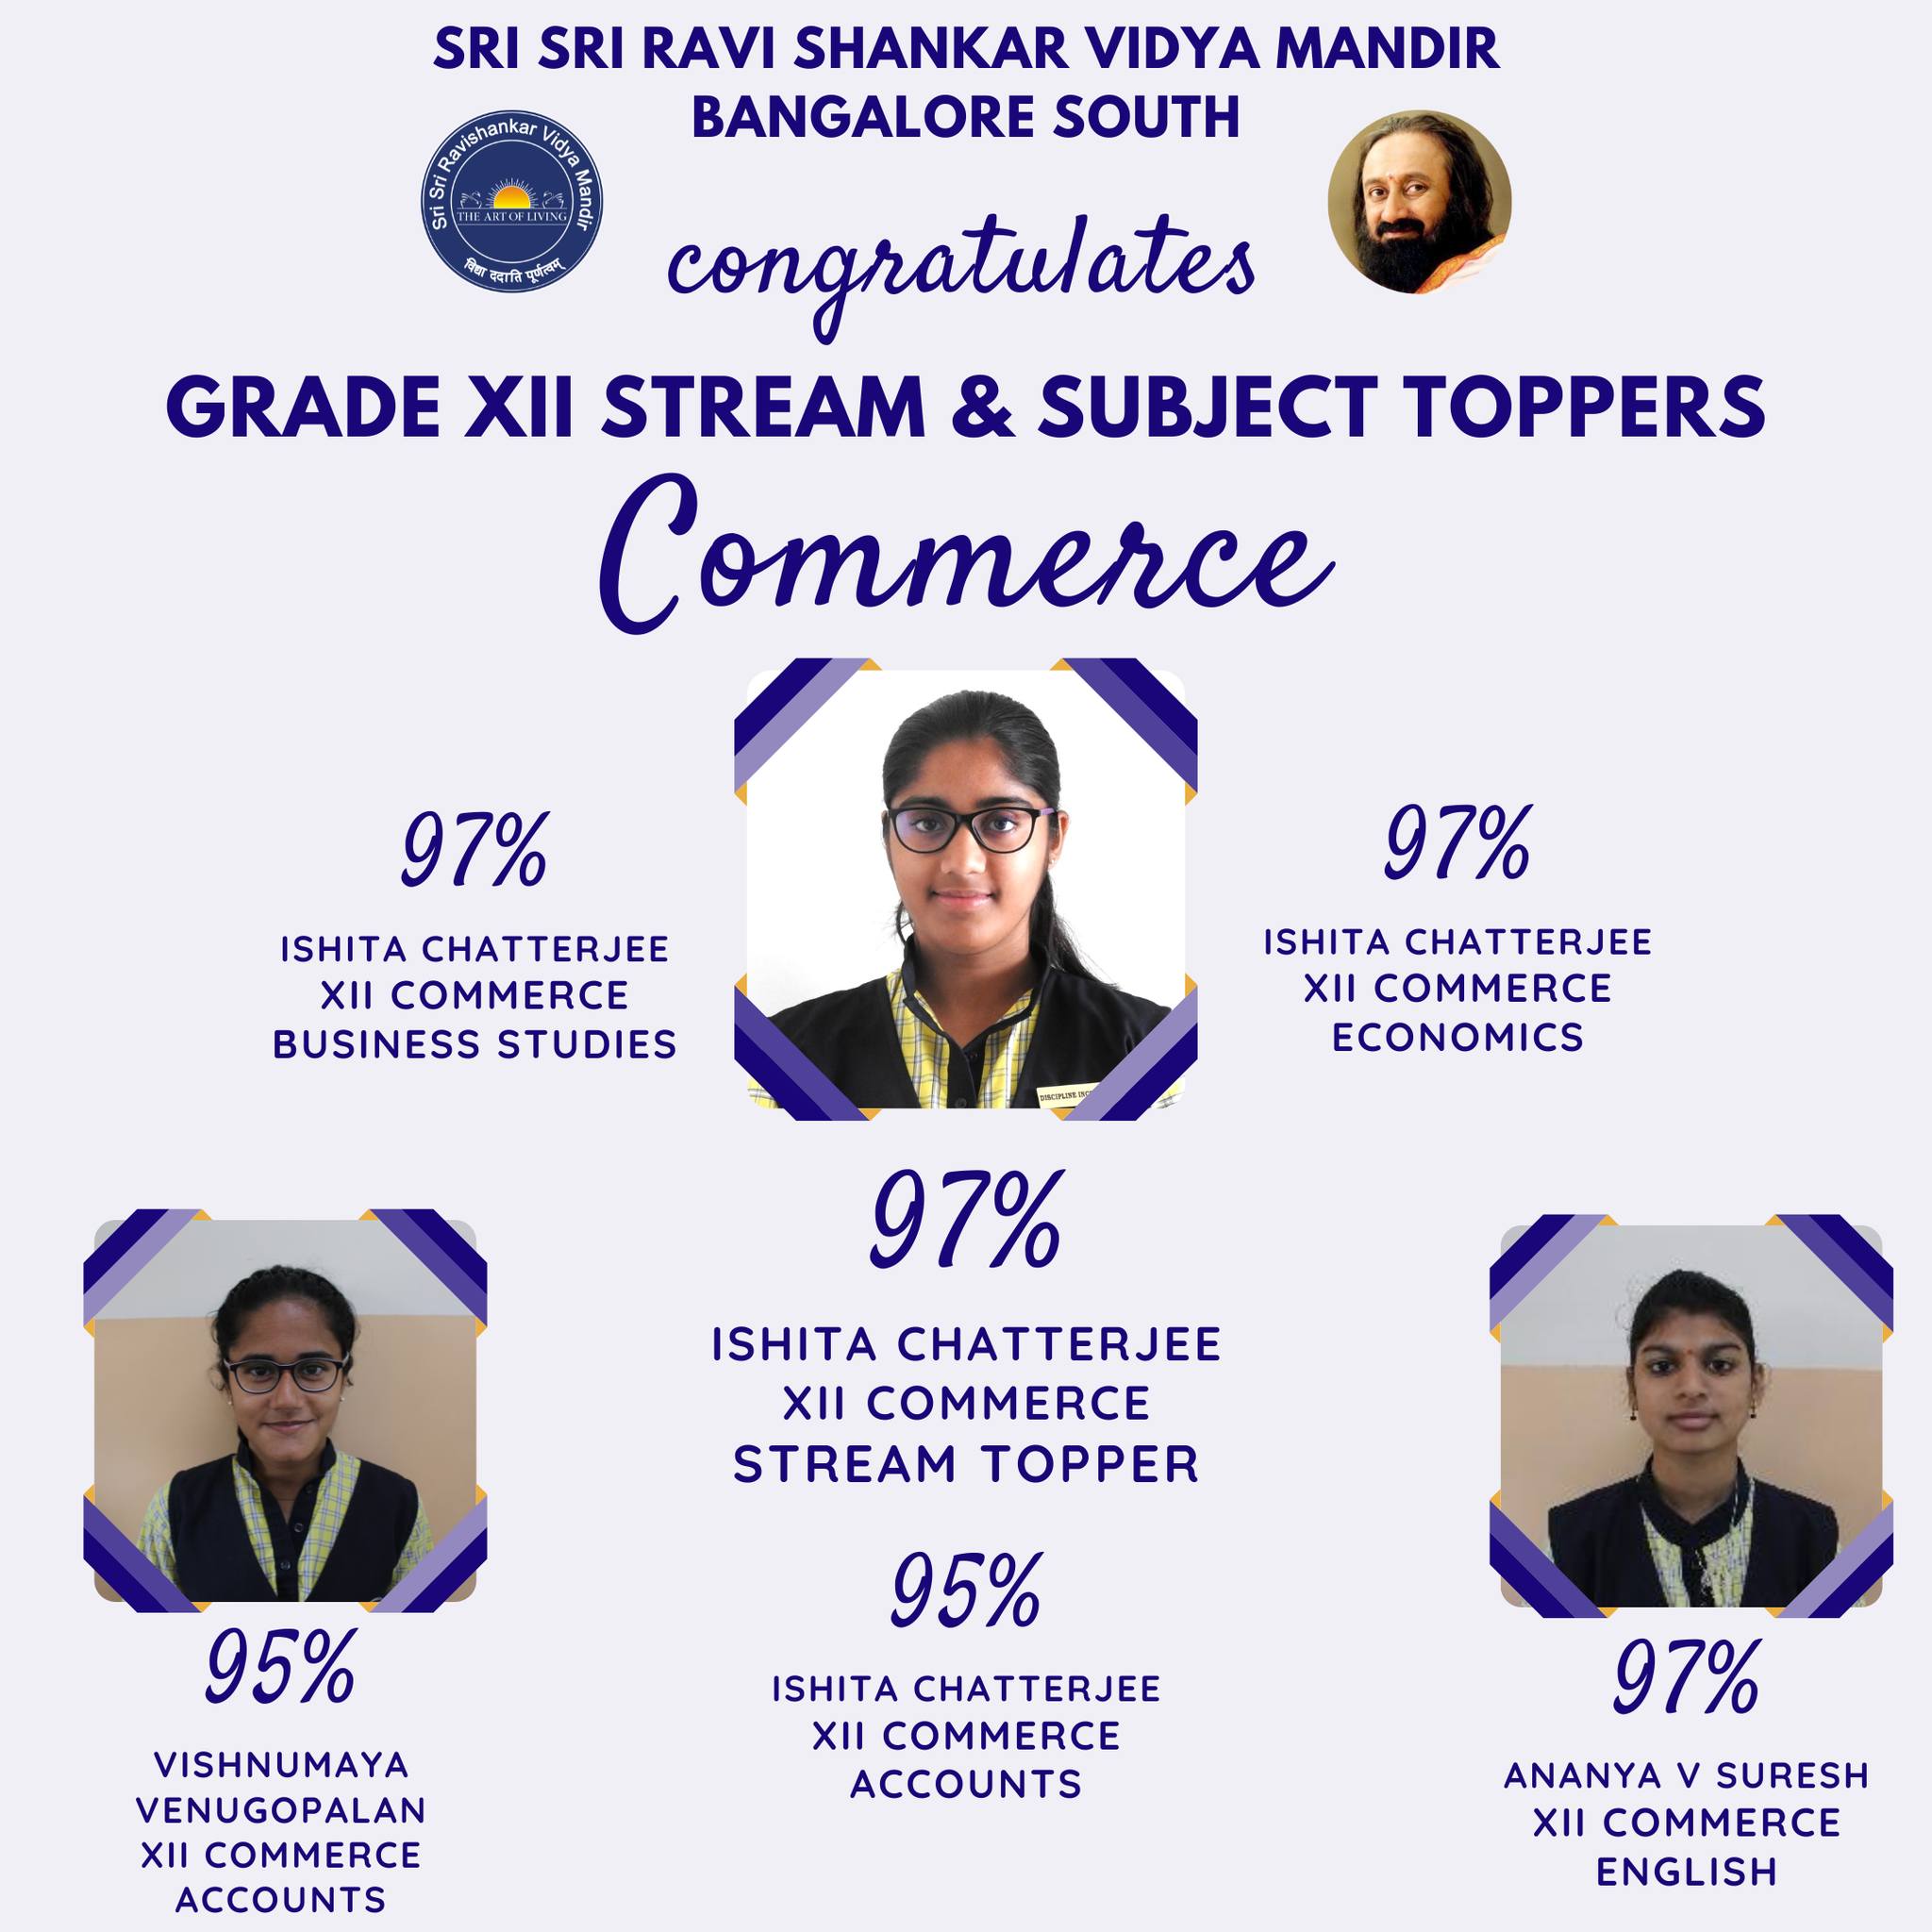 Grade XII Stream & Subject Toppers